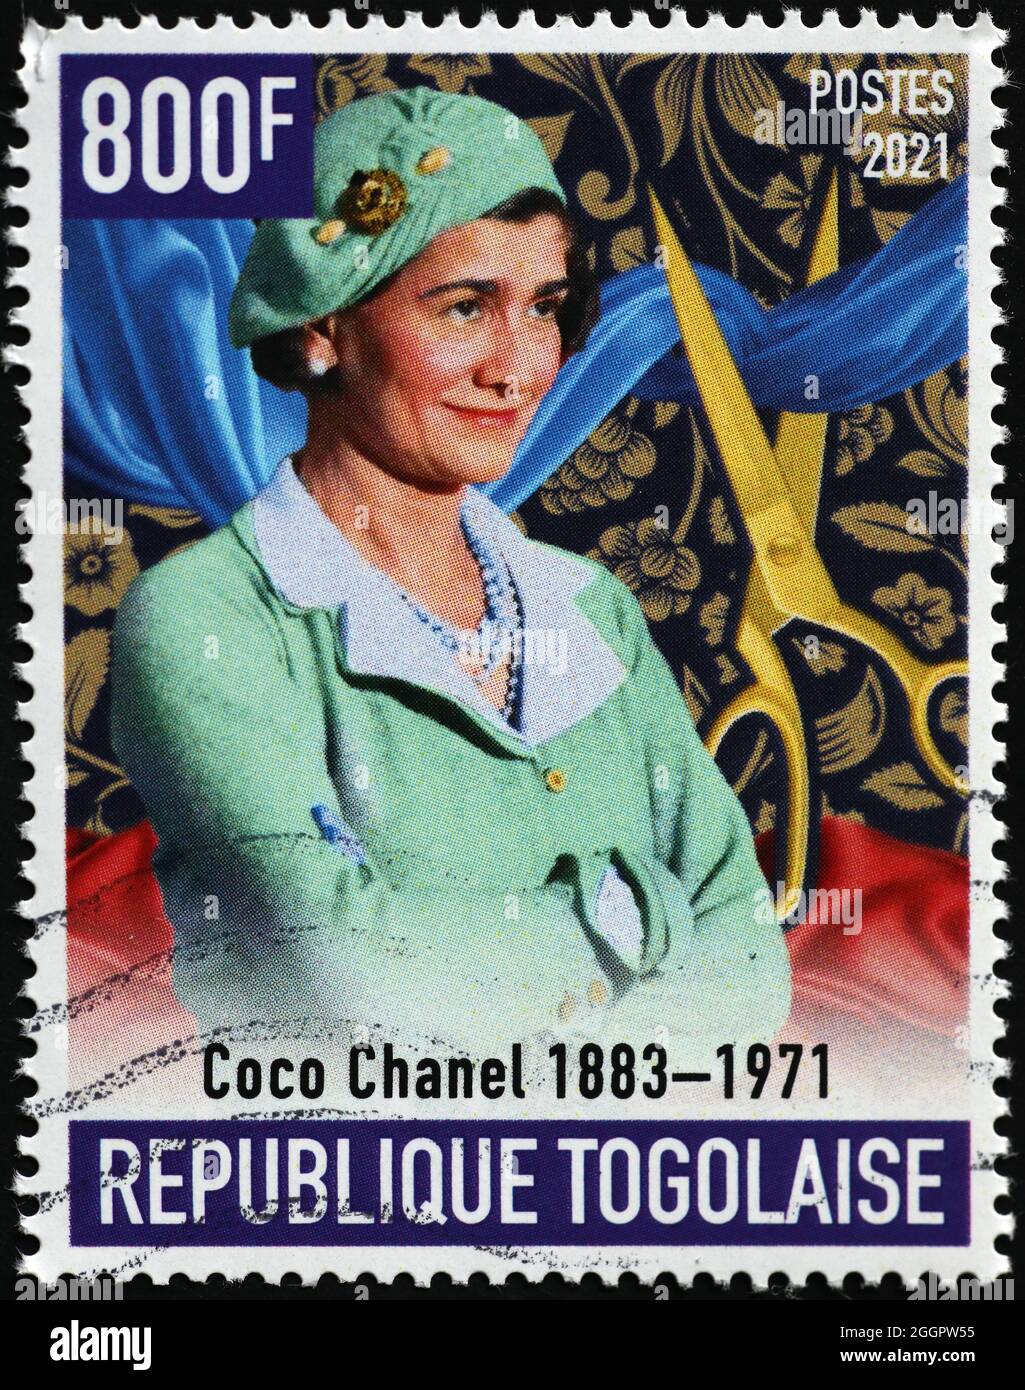 Famous stylist Coco Chanel on postage stamp Stock Photo